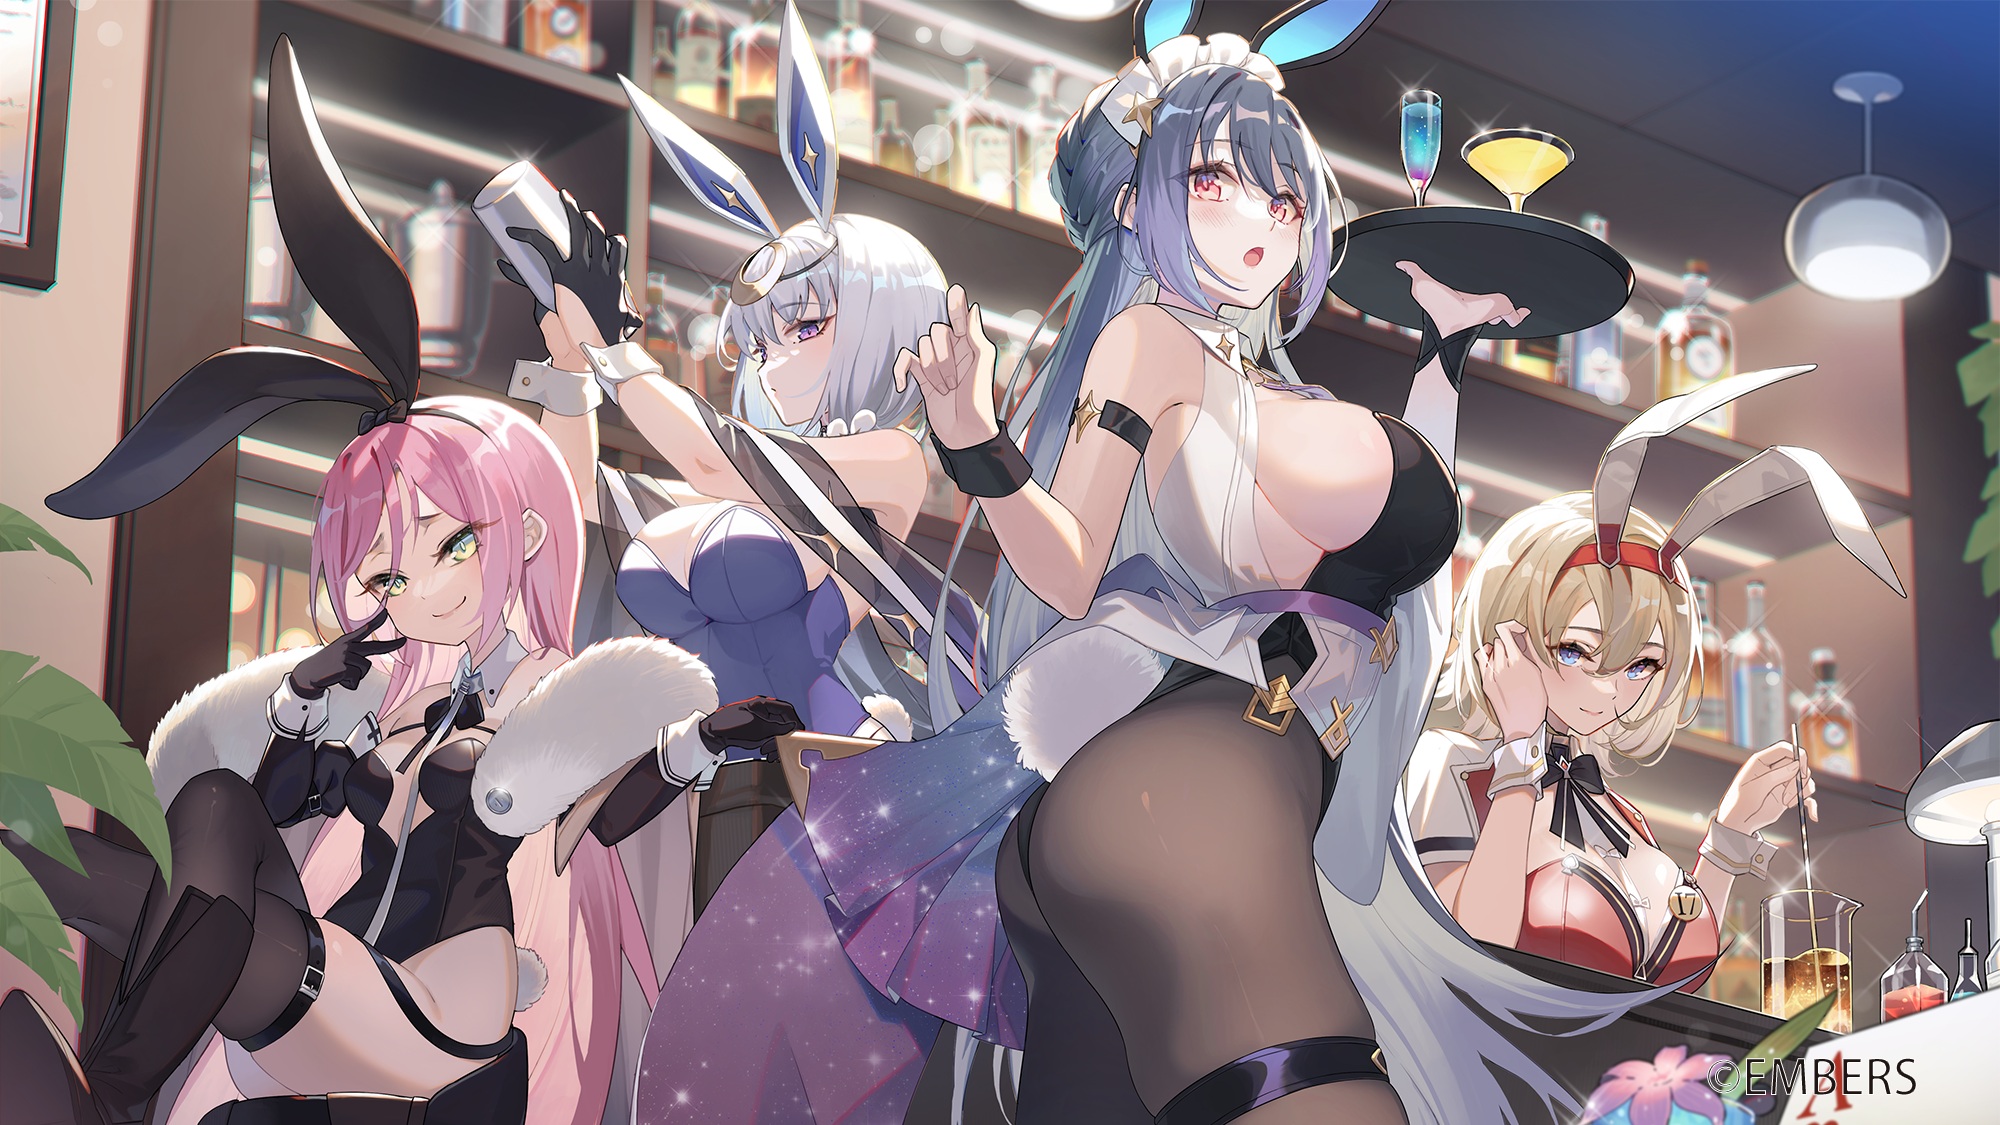 Anime 2000x1125 Ash Arms group of women anime girls huge breasts bunny suit animal ears bunny girl watermarked black gloves cleavage bunny ears stockings pantyhose sideboob bar women indoors bottles wristwear alcohol bunny tail smiling open mouth Selenoring legs crossed thigh strap elbow gloves ass gloves leotard